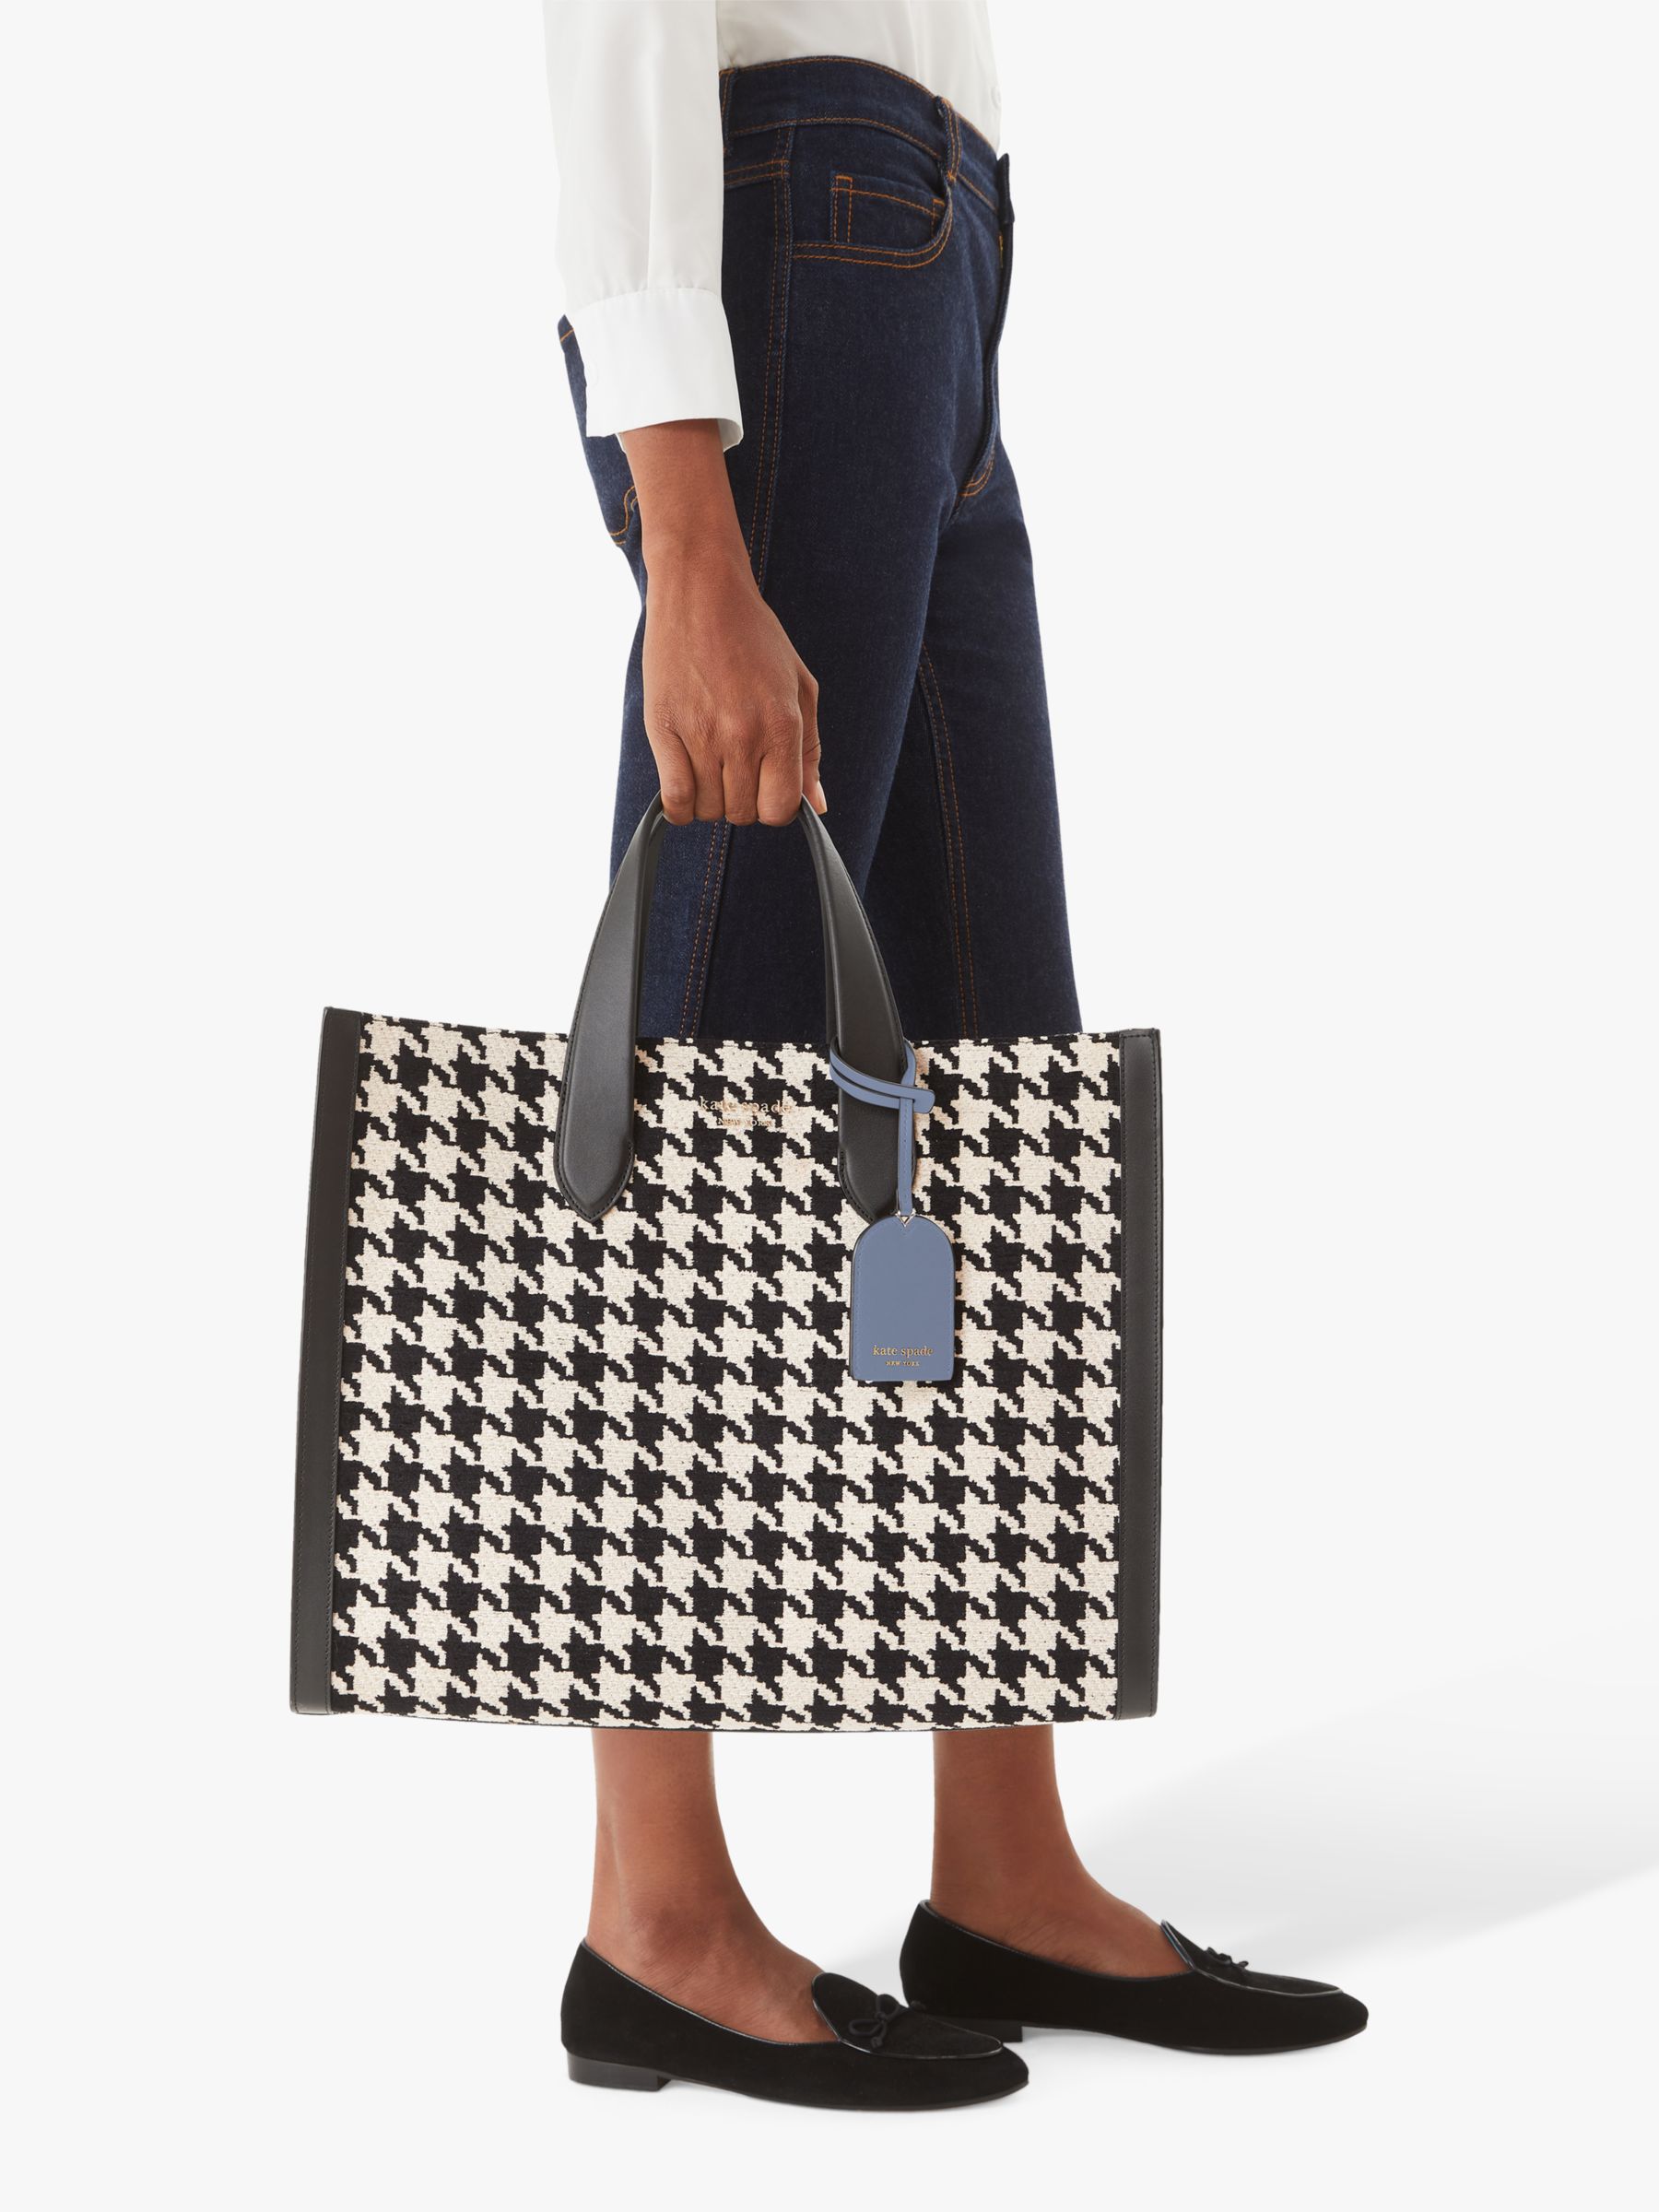 kate spade new york on X: manhattan (tote), where anything is possible.  introducing our most spacious bag yet.  / X